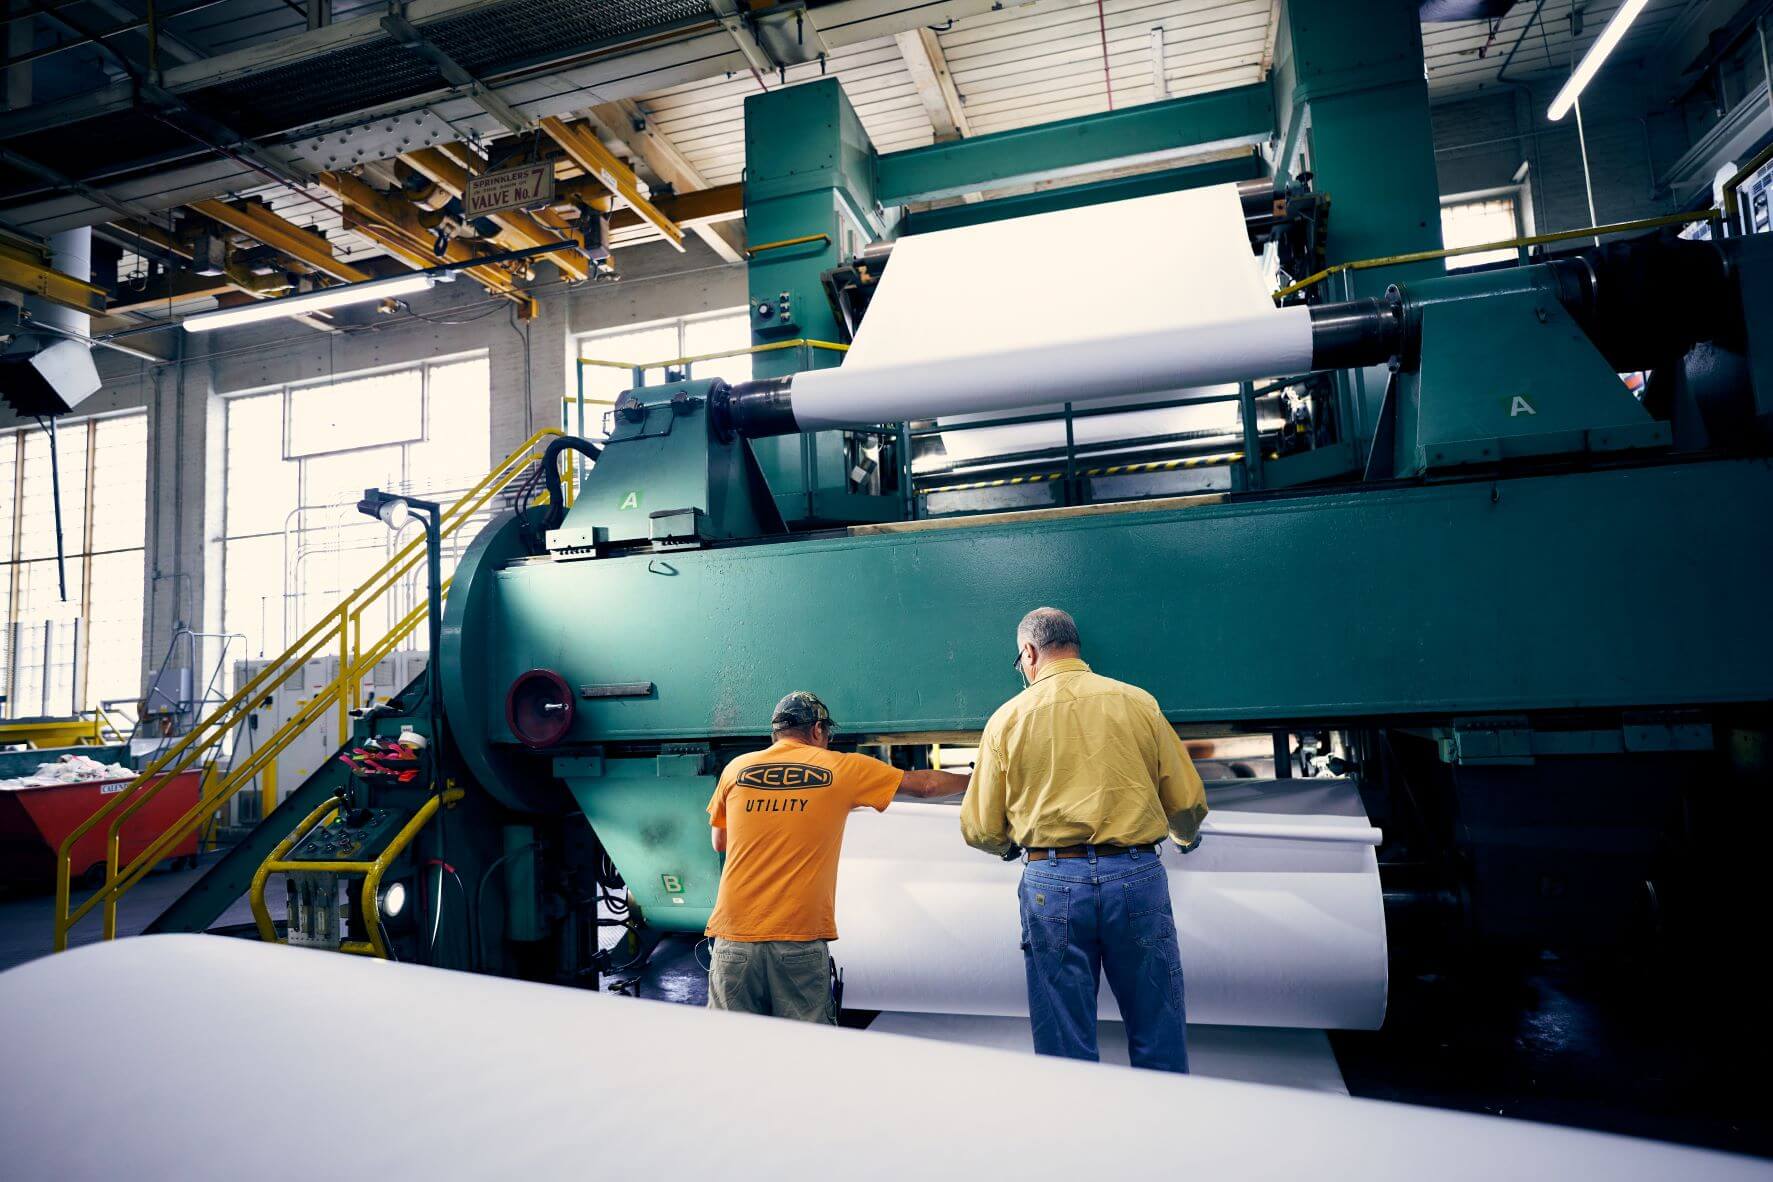 Appvion employees at work in the plant